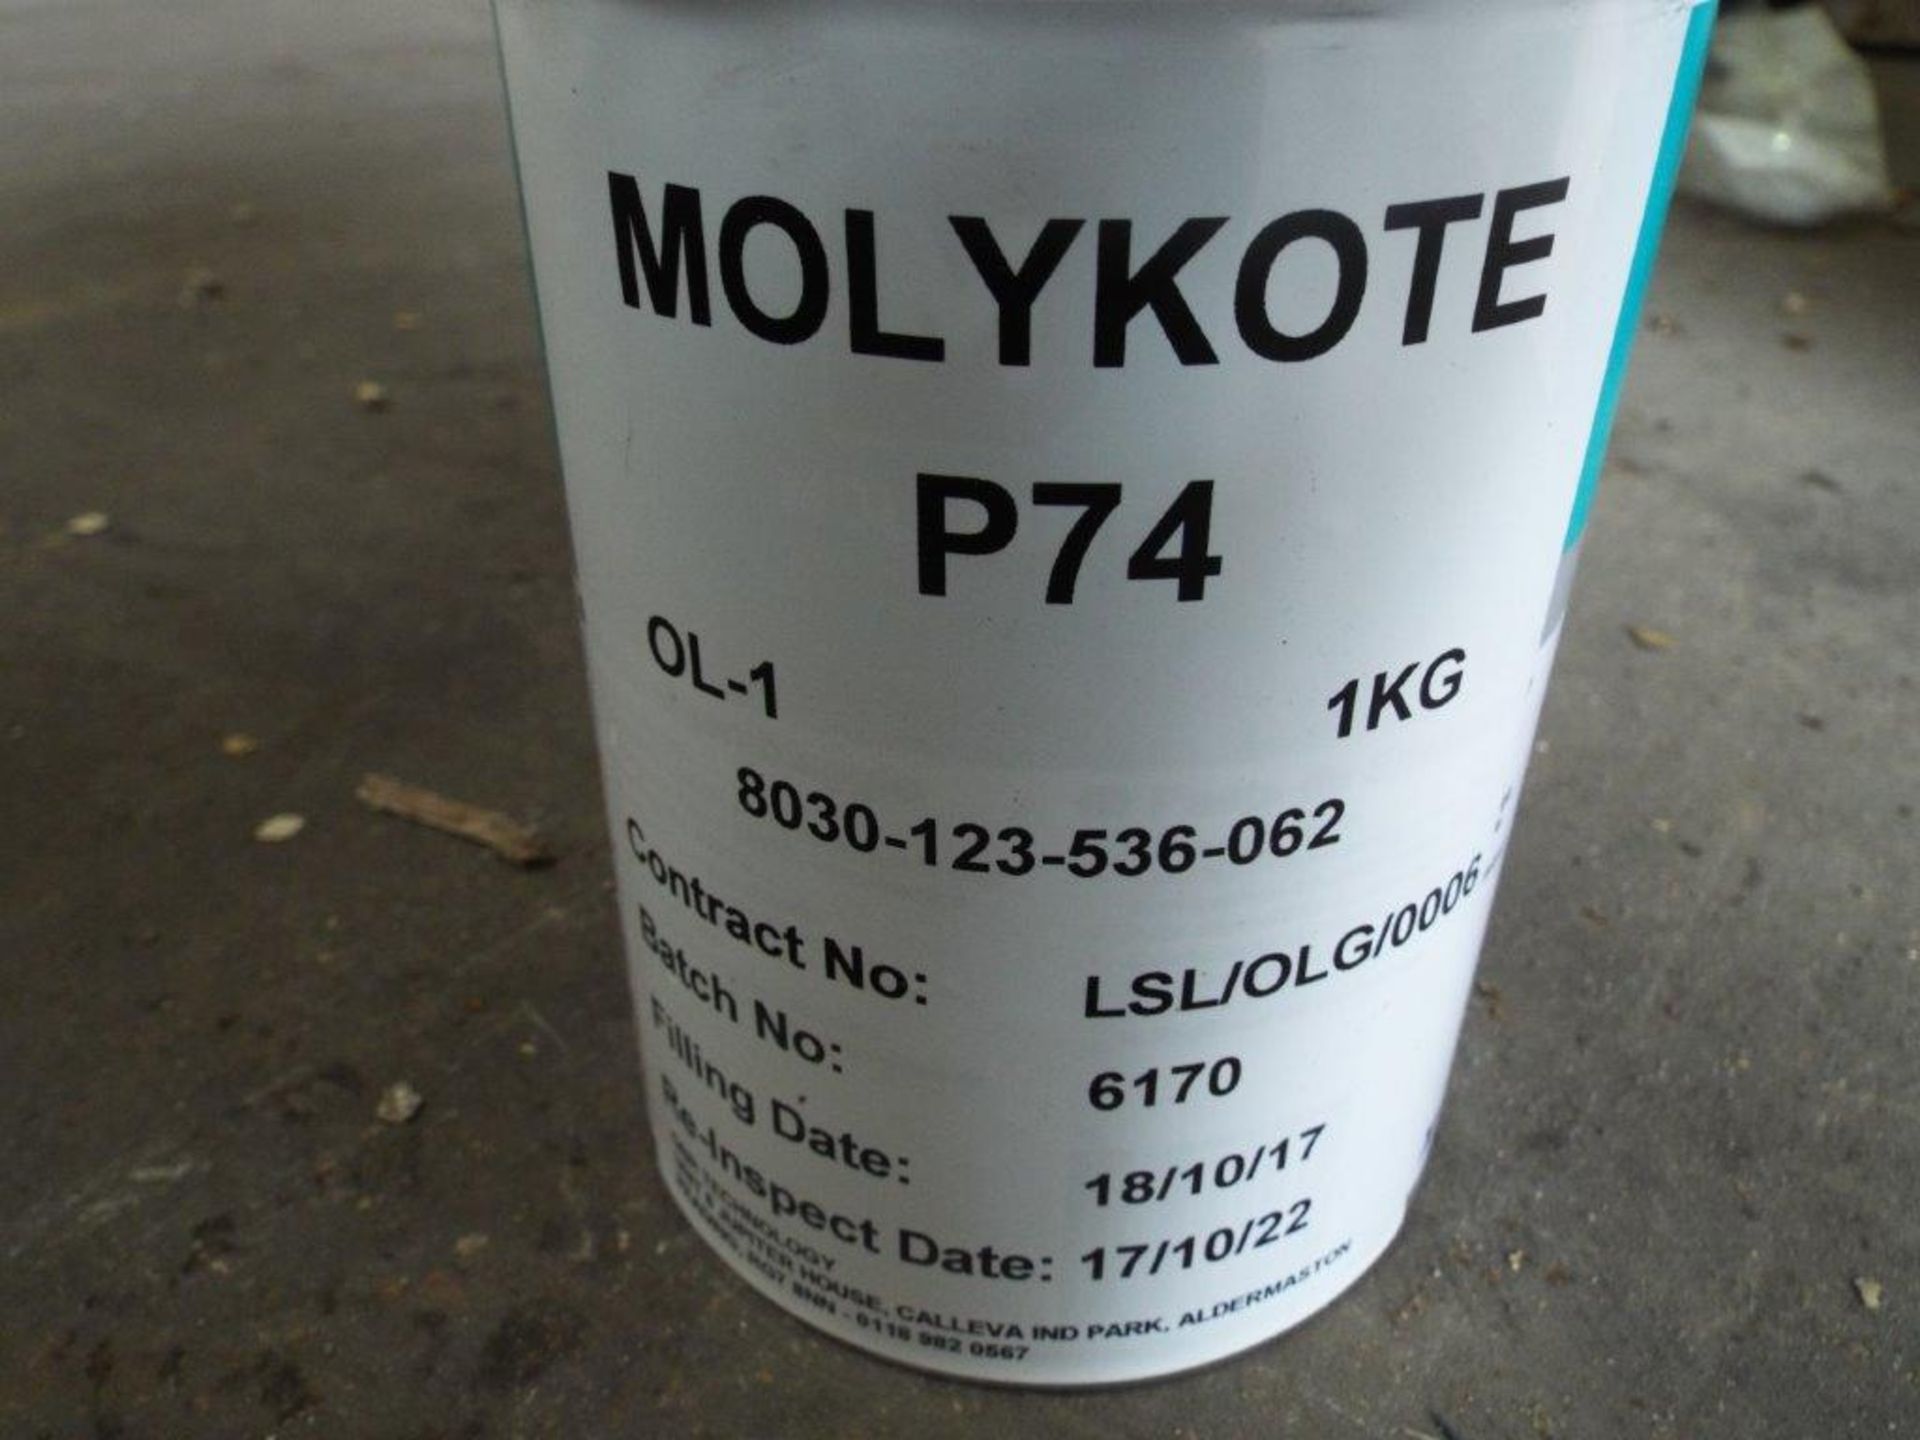 17 x Unissued 1Kg Tubs of Molykote P74 PTFE Super Anti-Seize Grease - Image 4 of 5